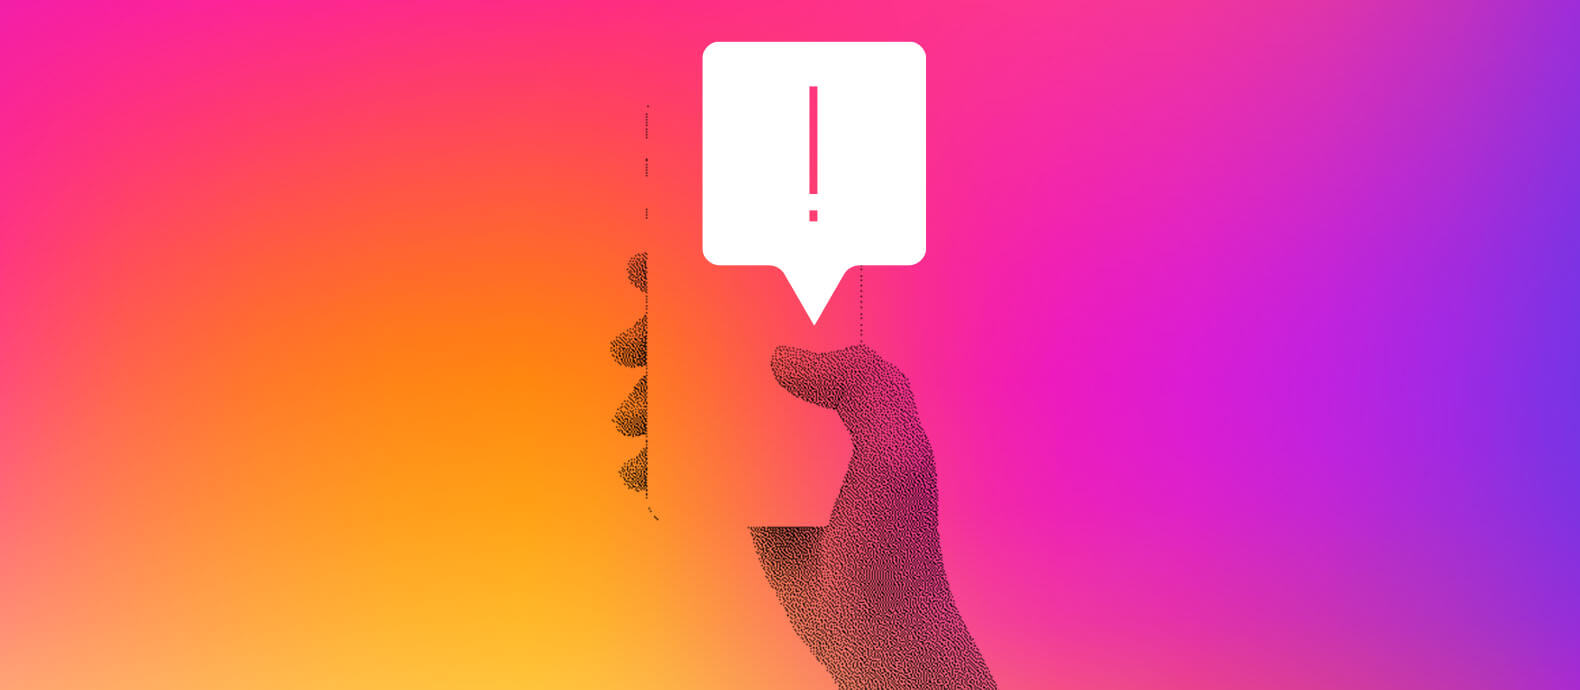 How to take down an Instagram account 